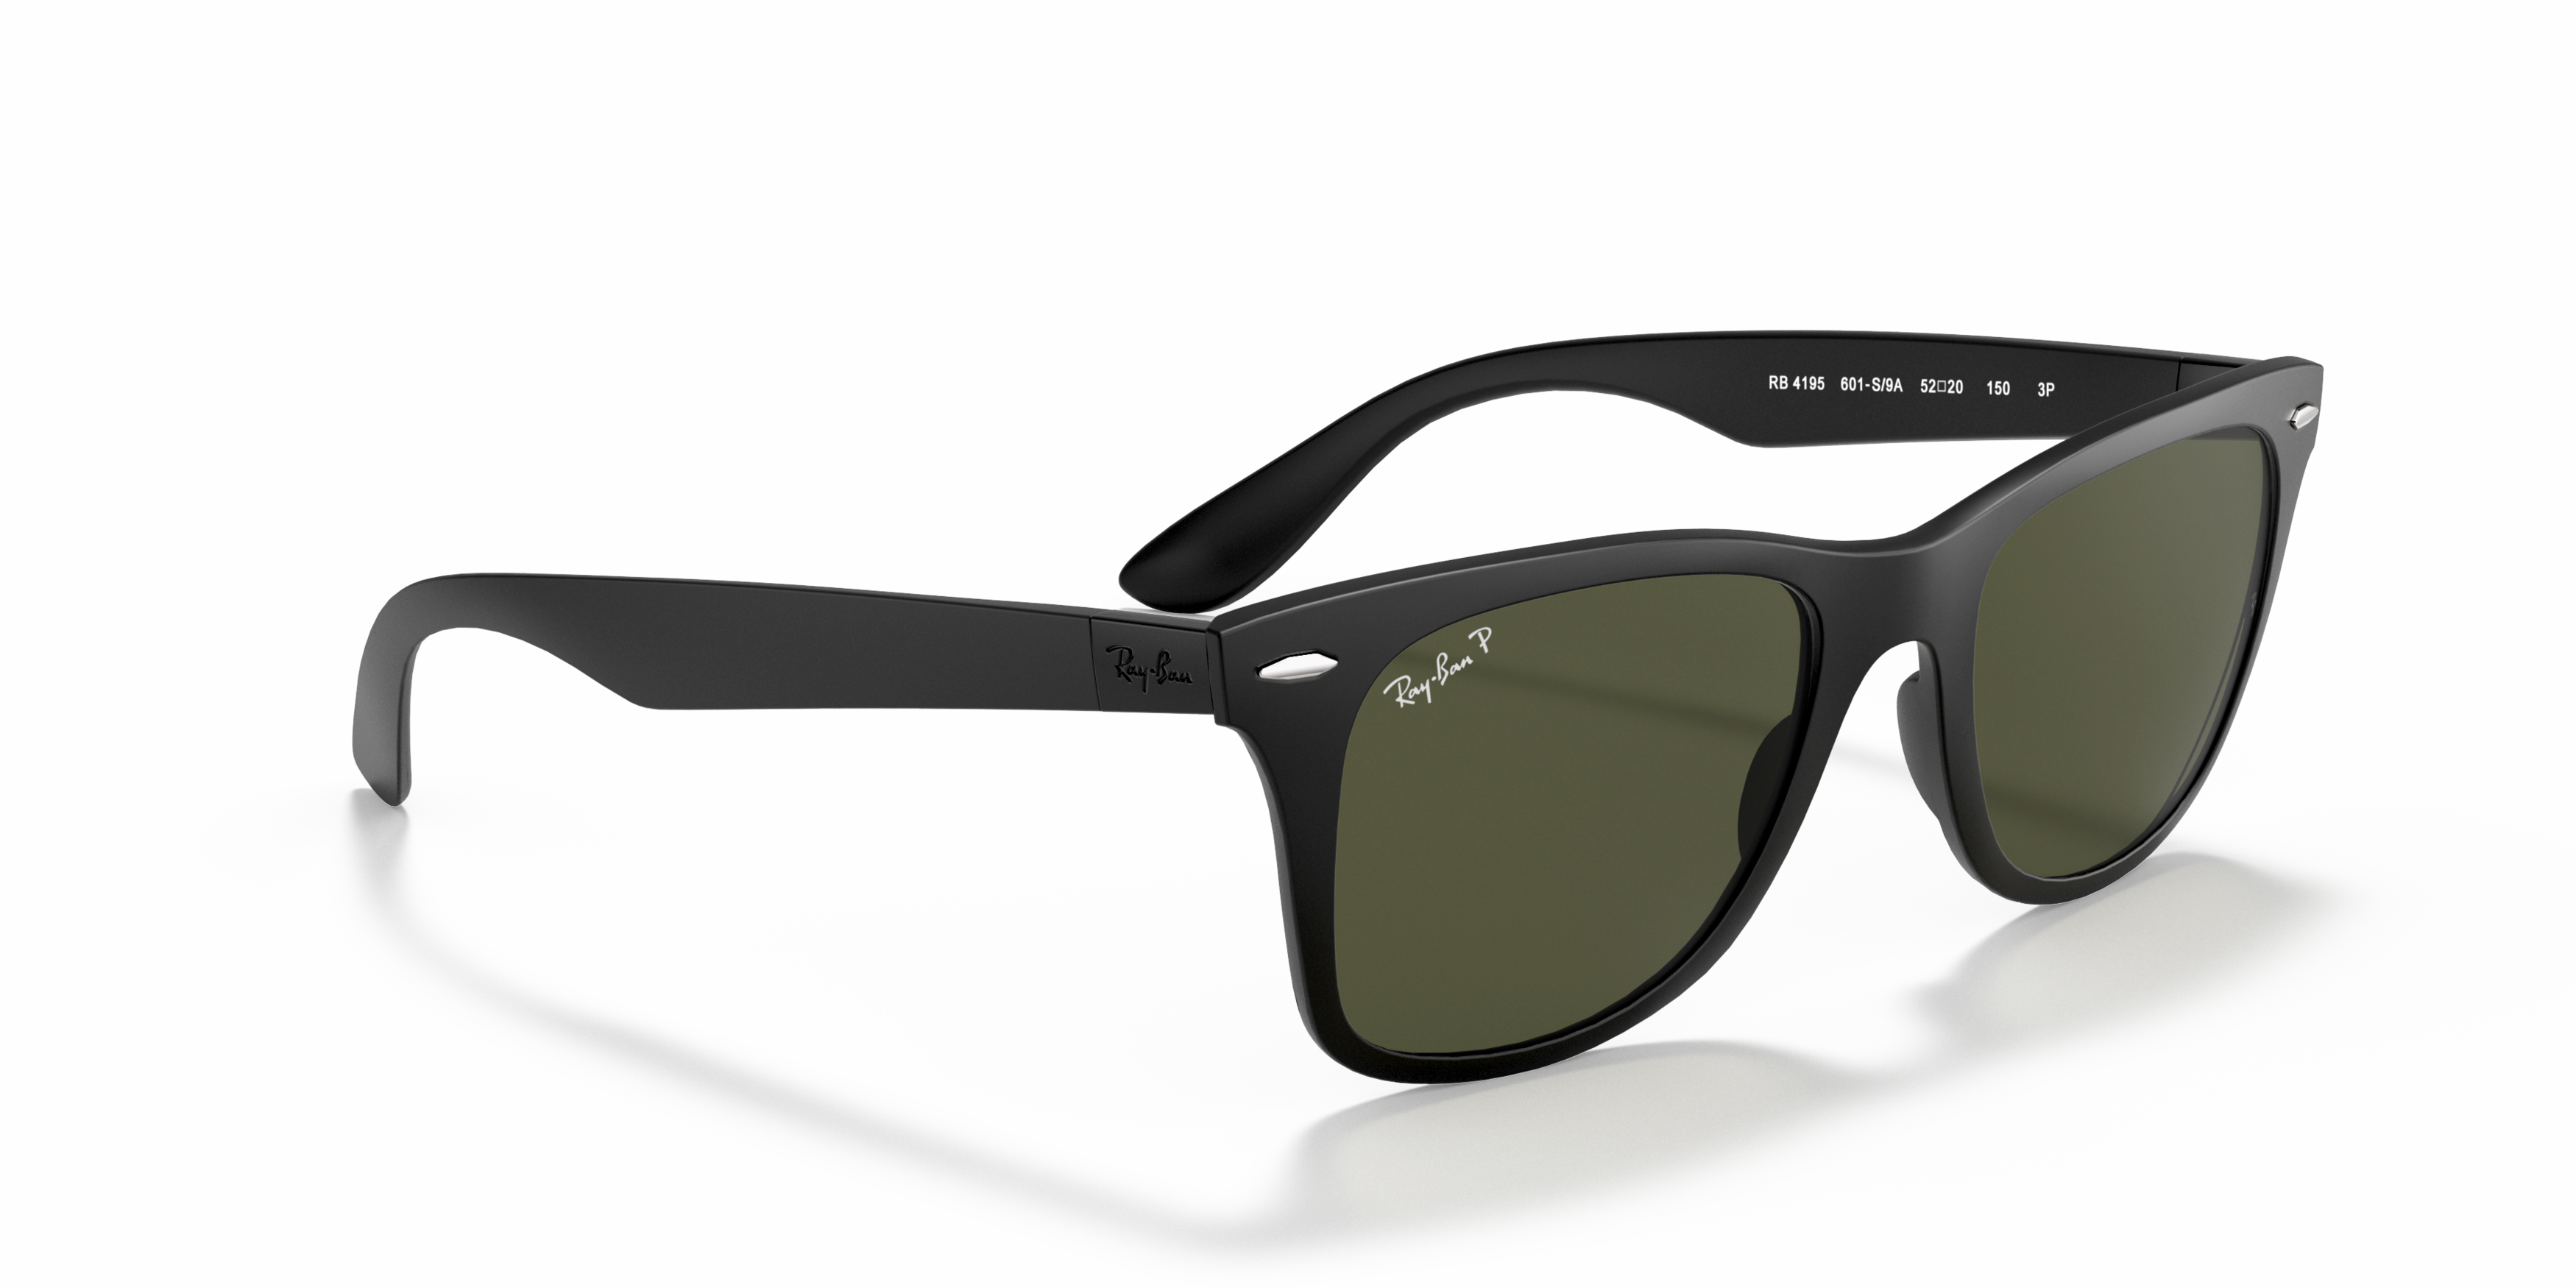 [products.image.angle_right01] Ray-Ban Wayfarer Liteforce 0RB4195 601S9A